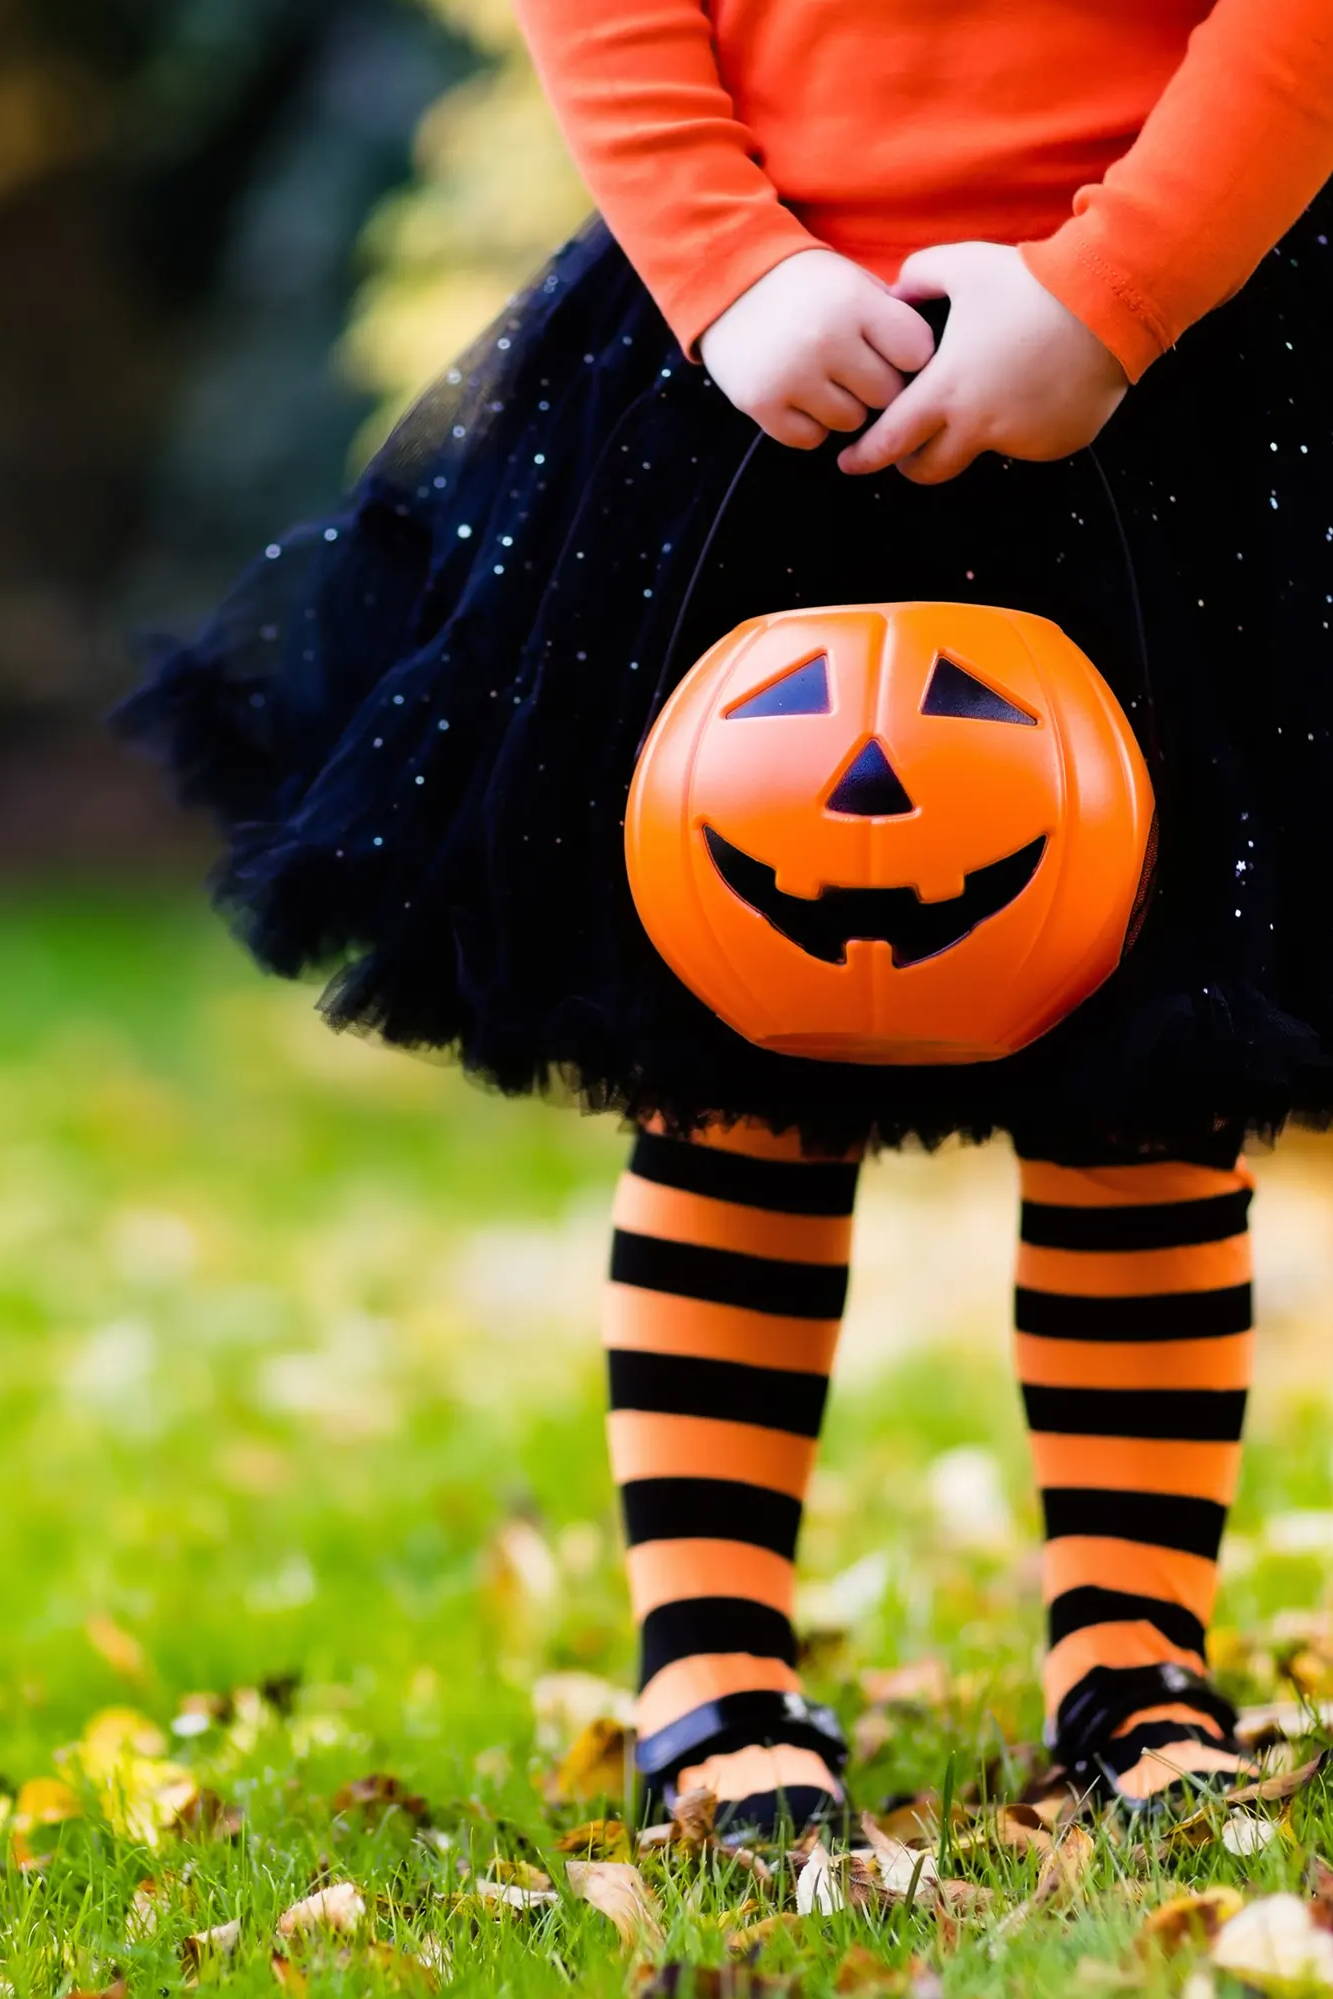 Halloween; dressing up; sensory processing disorder; sensory sensitive; sensory sensitive children; Halloween costume; face paint; comfortable costume; seamless clothes; deep pressure input; Halloween decorations; Halloween sights and sounds; trick-or-treating; safe space; trunk-or-treat; Halloween movies; pumpkin art